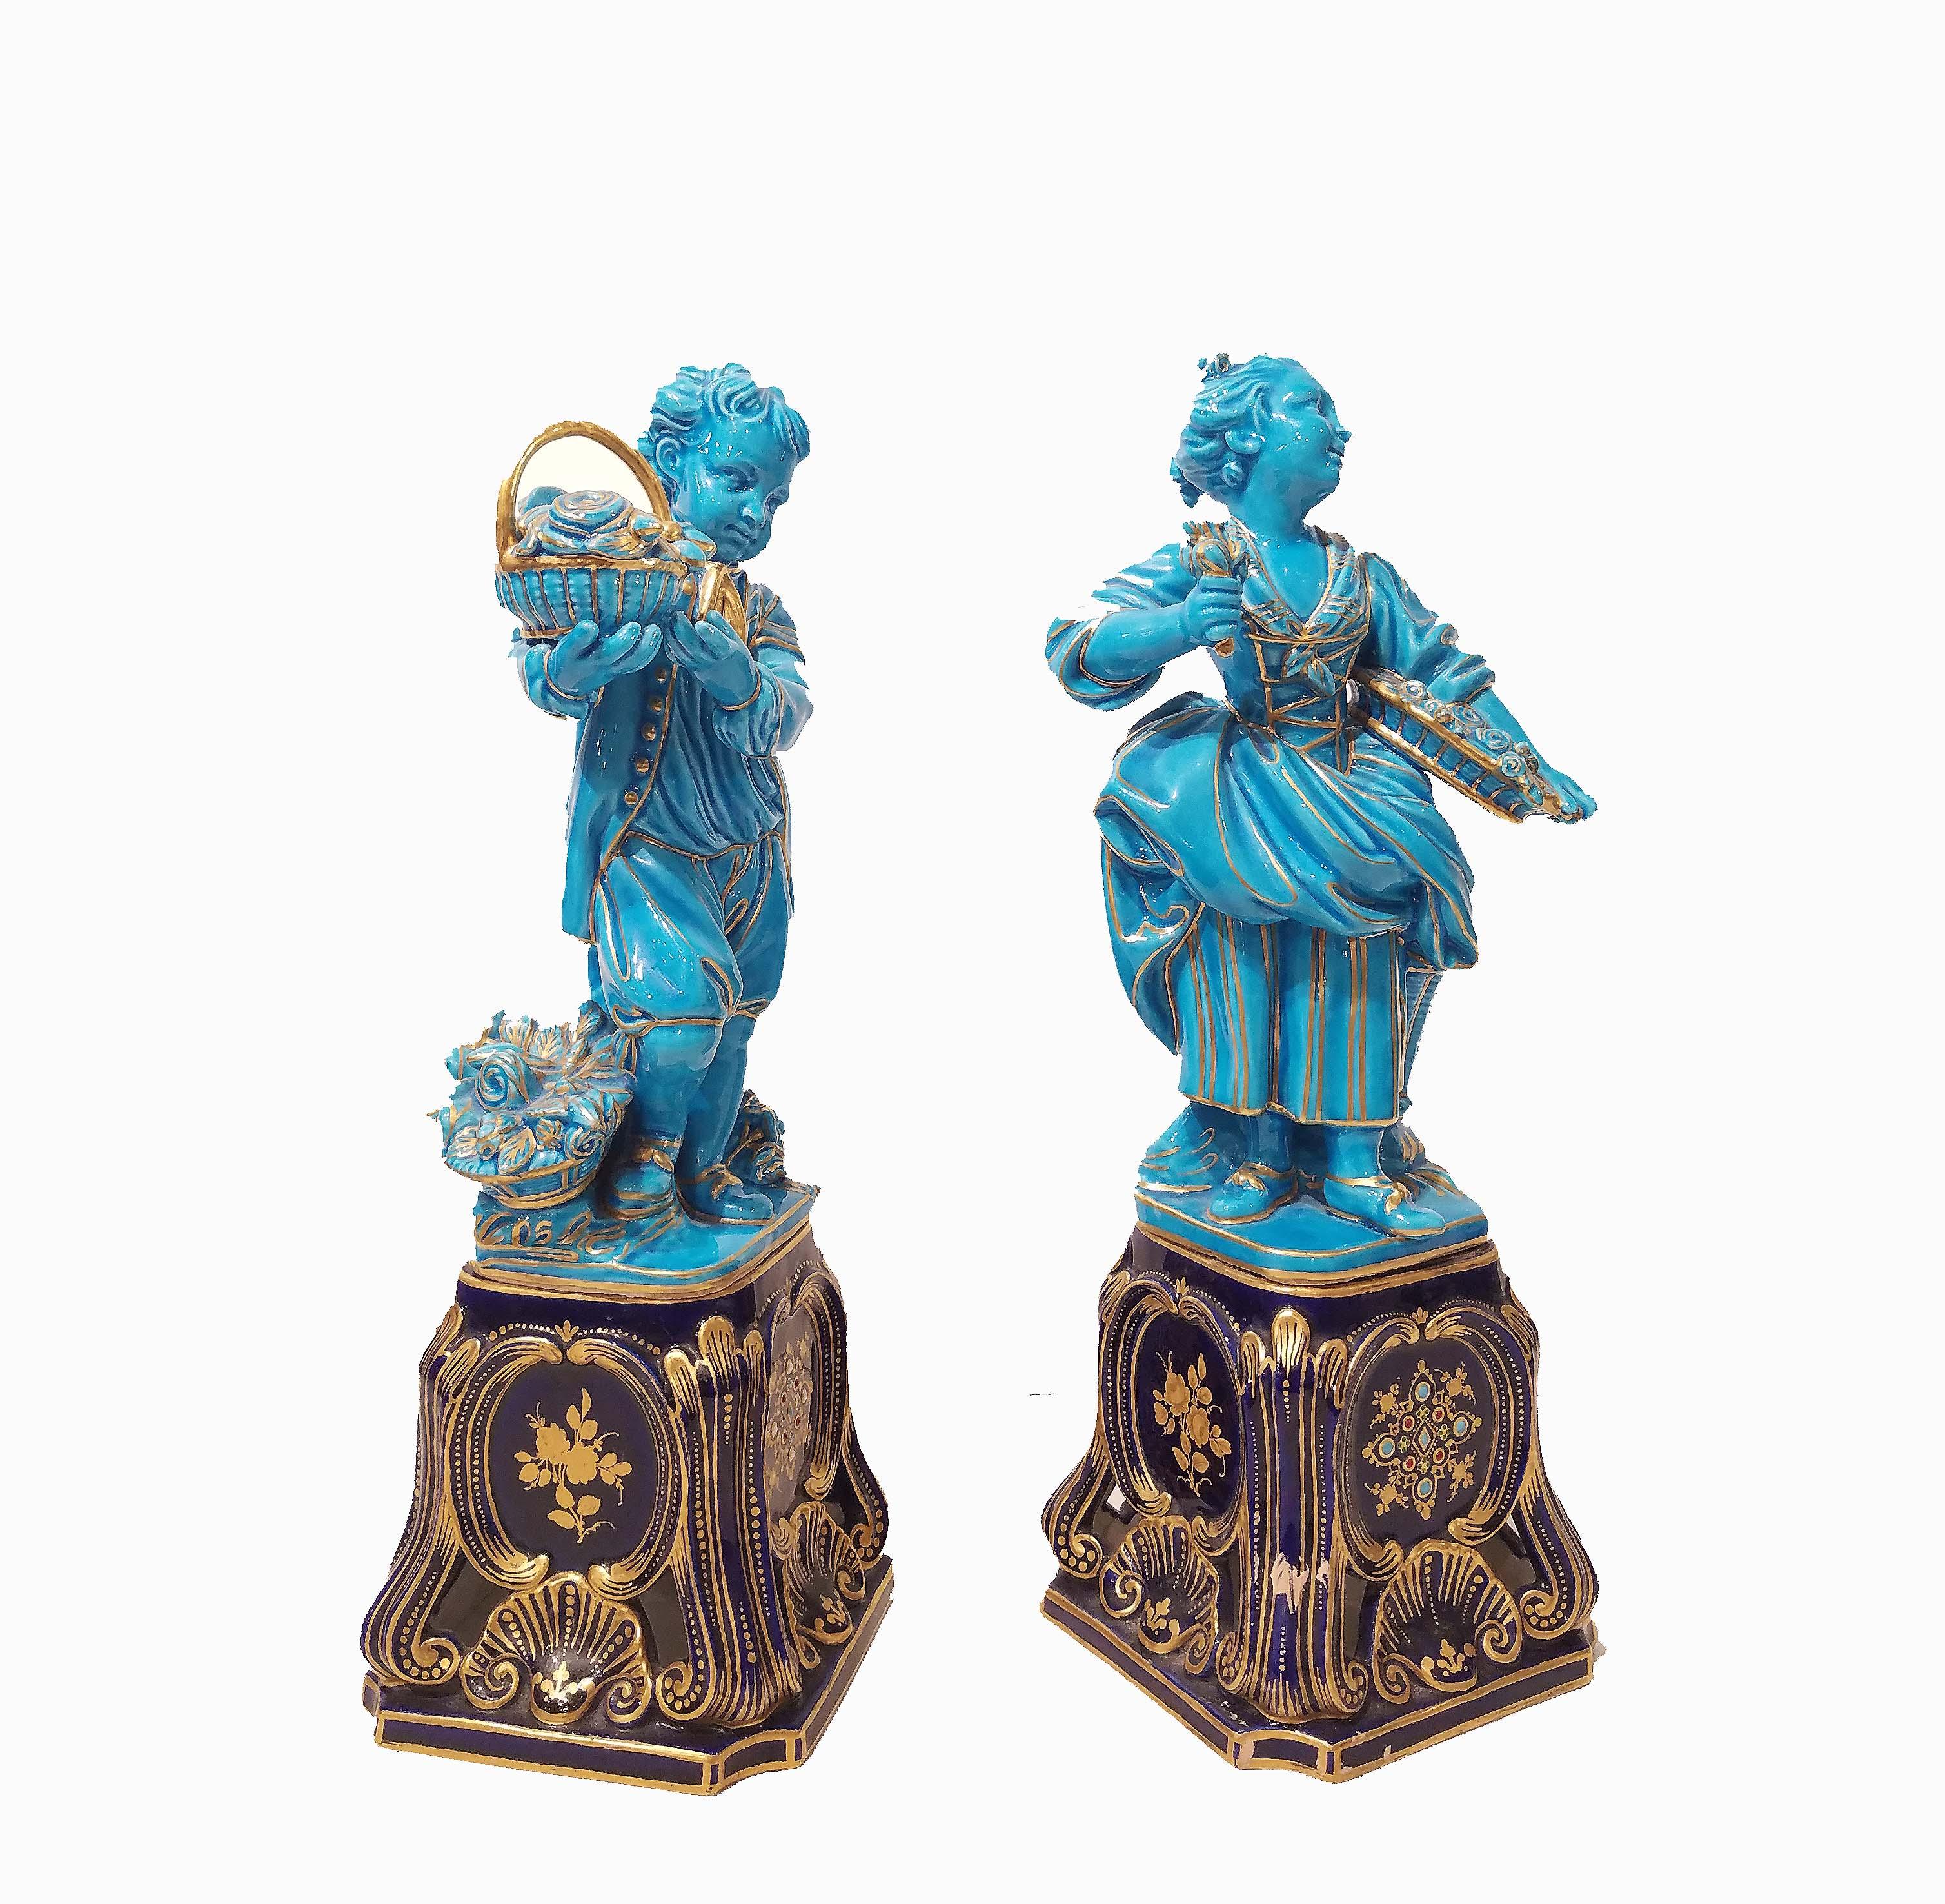 A pair of French Sevres style turquoise-glazed figures of a boy and girl, late 19th century
After a model by Falconet.
Both holding a basket of flowers, the details picked out in gold, on a cobalt blue jeweled porcelain decorated bases.
The girl